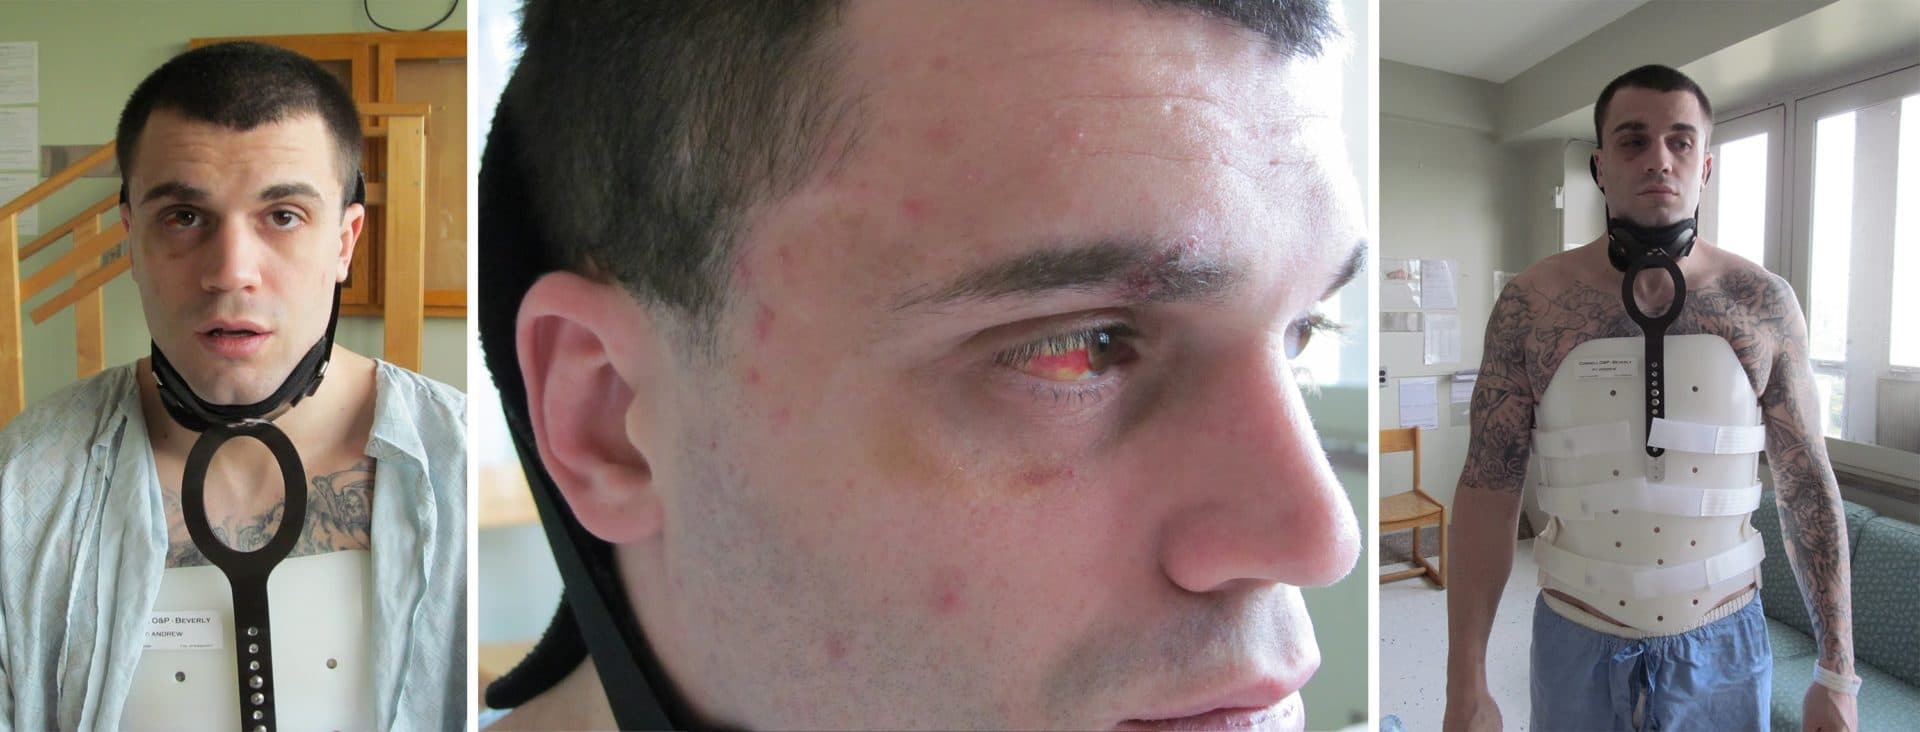 Andrew Nascarella suffered a fractured back, broken nose and required 15 stitches after an incident with Essex County jail corrections officers. (Courtesy Prisoner’s Legal Services)